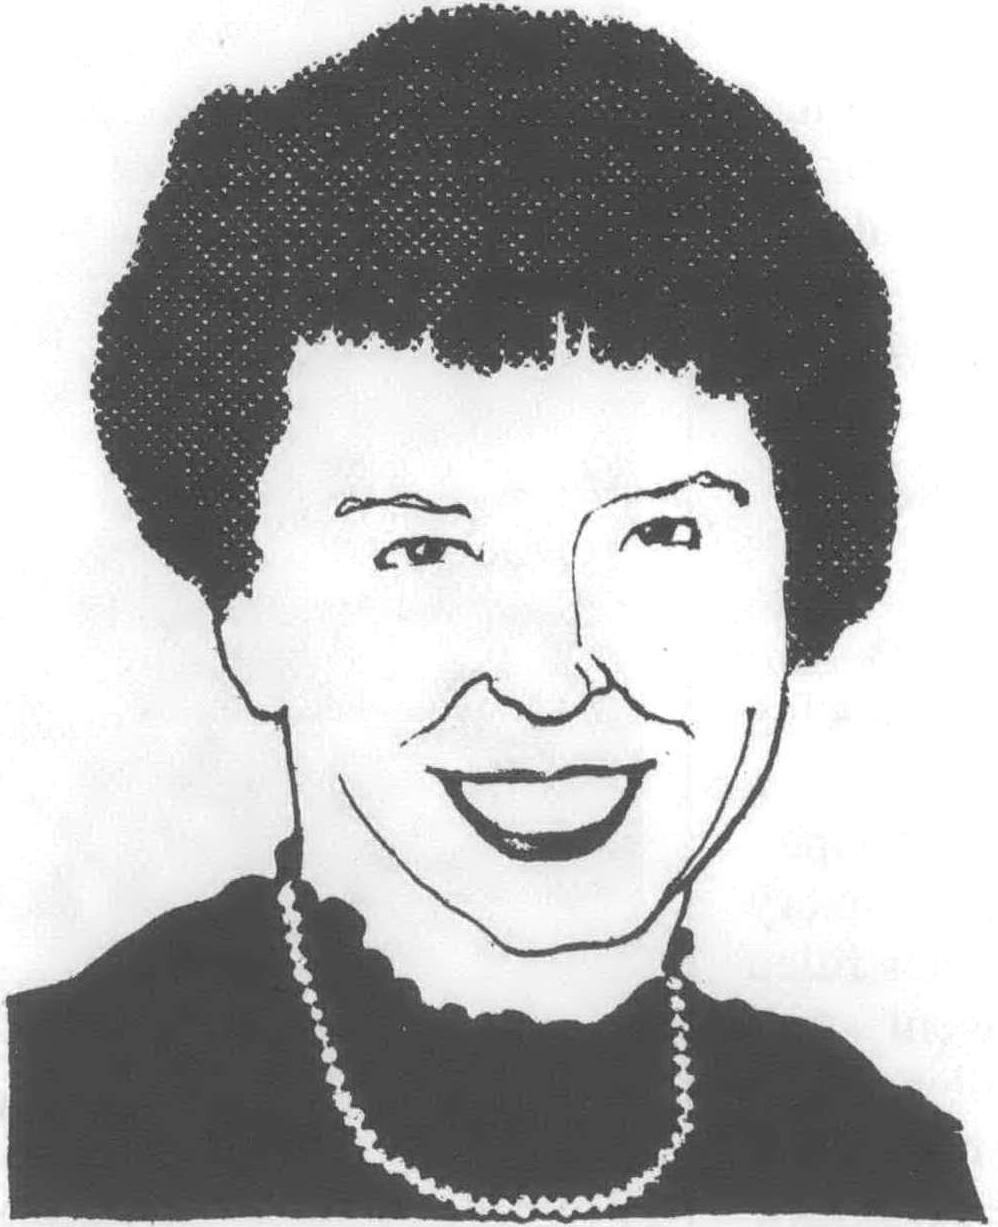 A black and white illustration of a smiling Mary Ann Watson